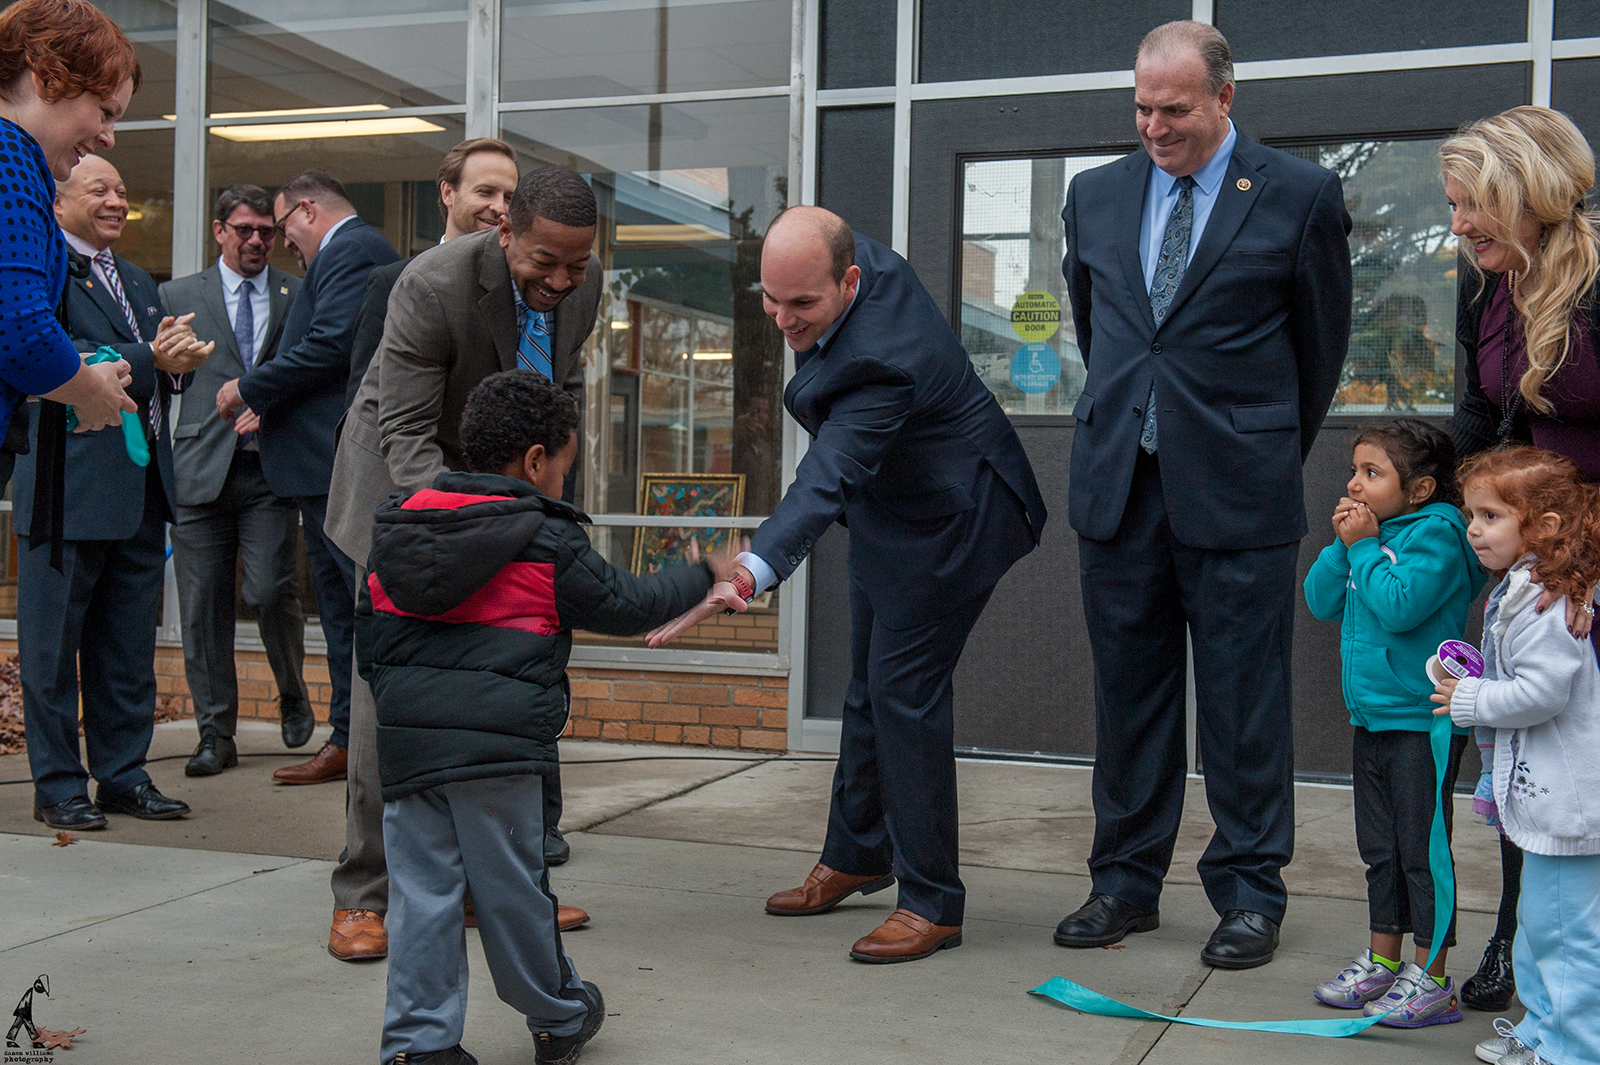 Ridgway White and a young student celebrate the opening of an early education centre in Flint, Michigan.